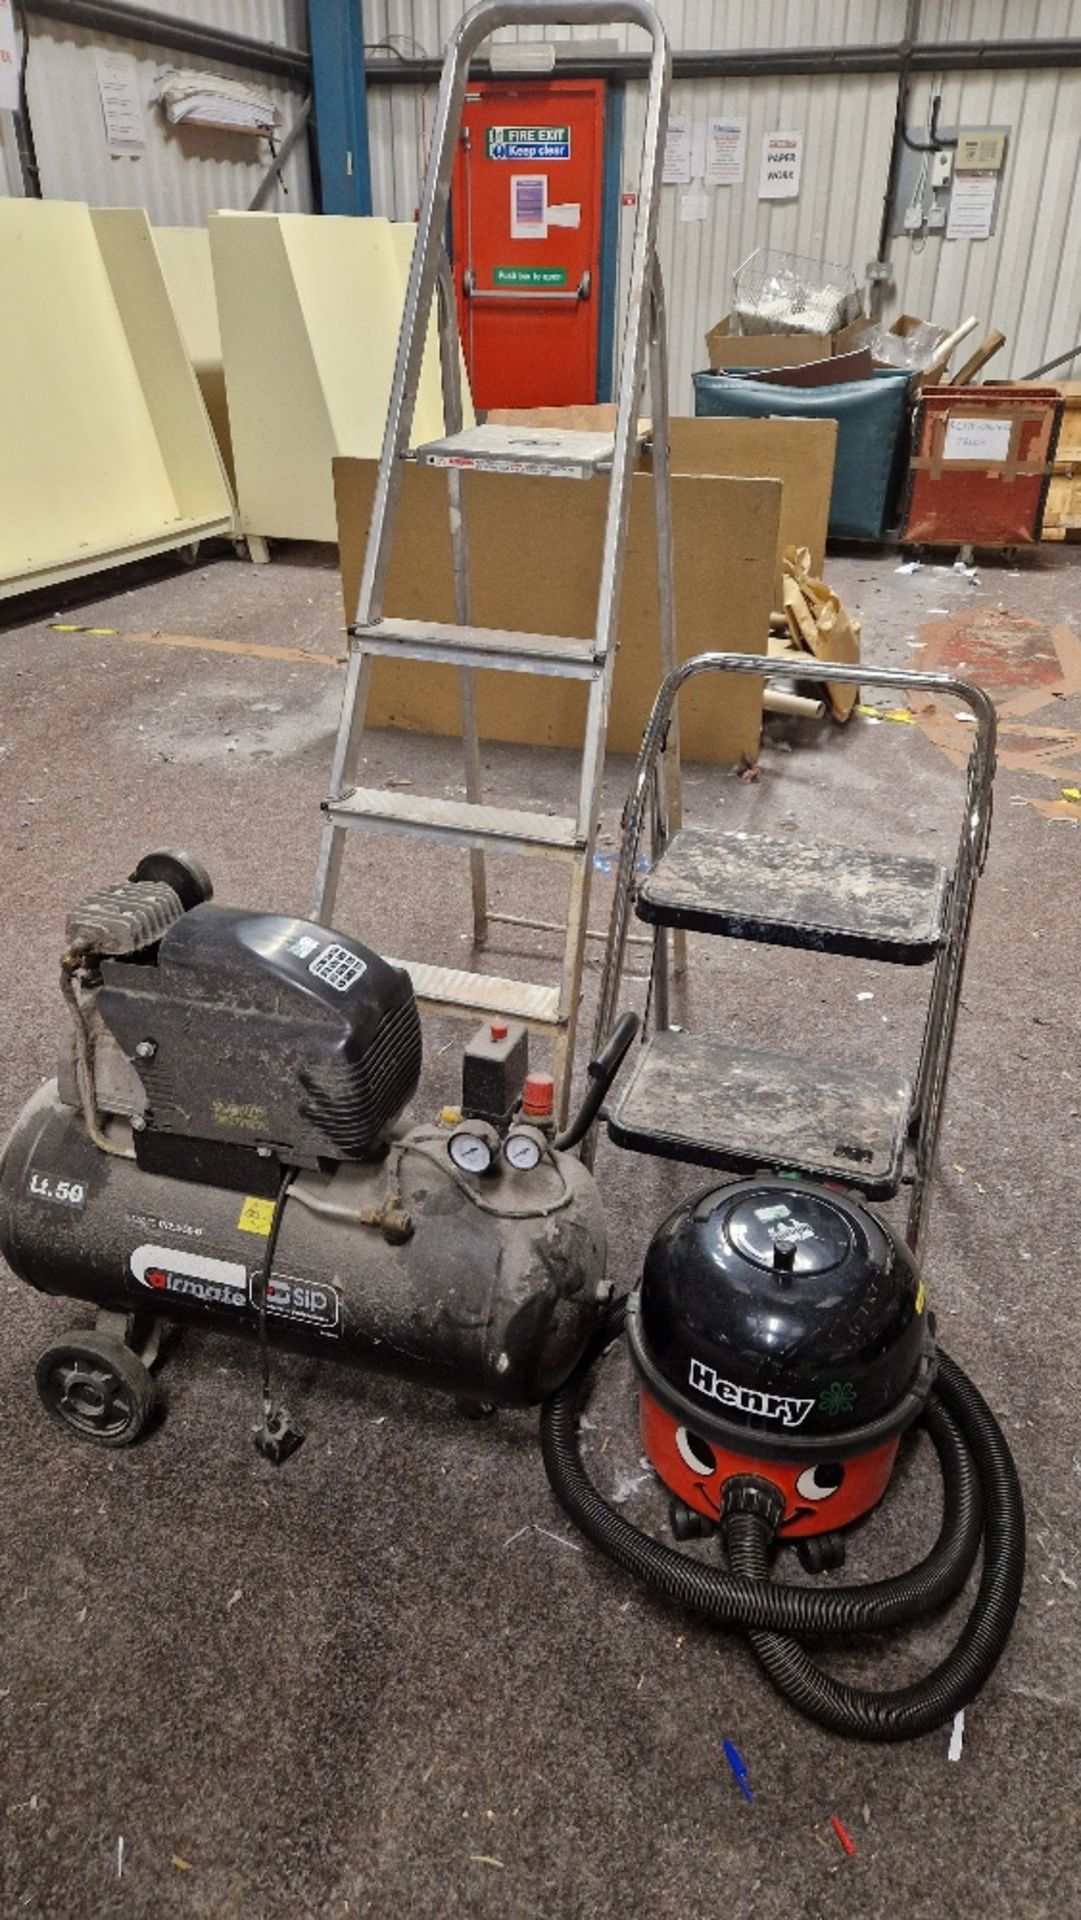 SIP AIRMATE MINI RECEIVER MOUNTED COMPRESSOR WITH TWO STEP LADDERS AND A HENRY VACUUM CLEANER ***